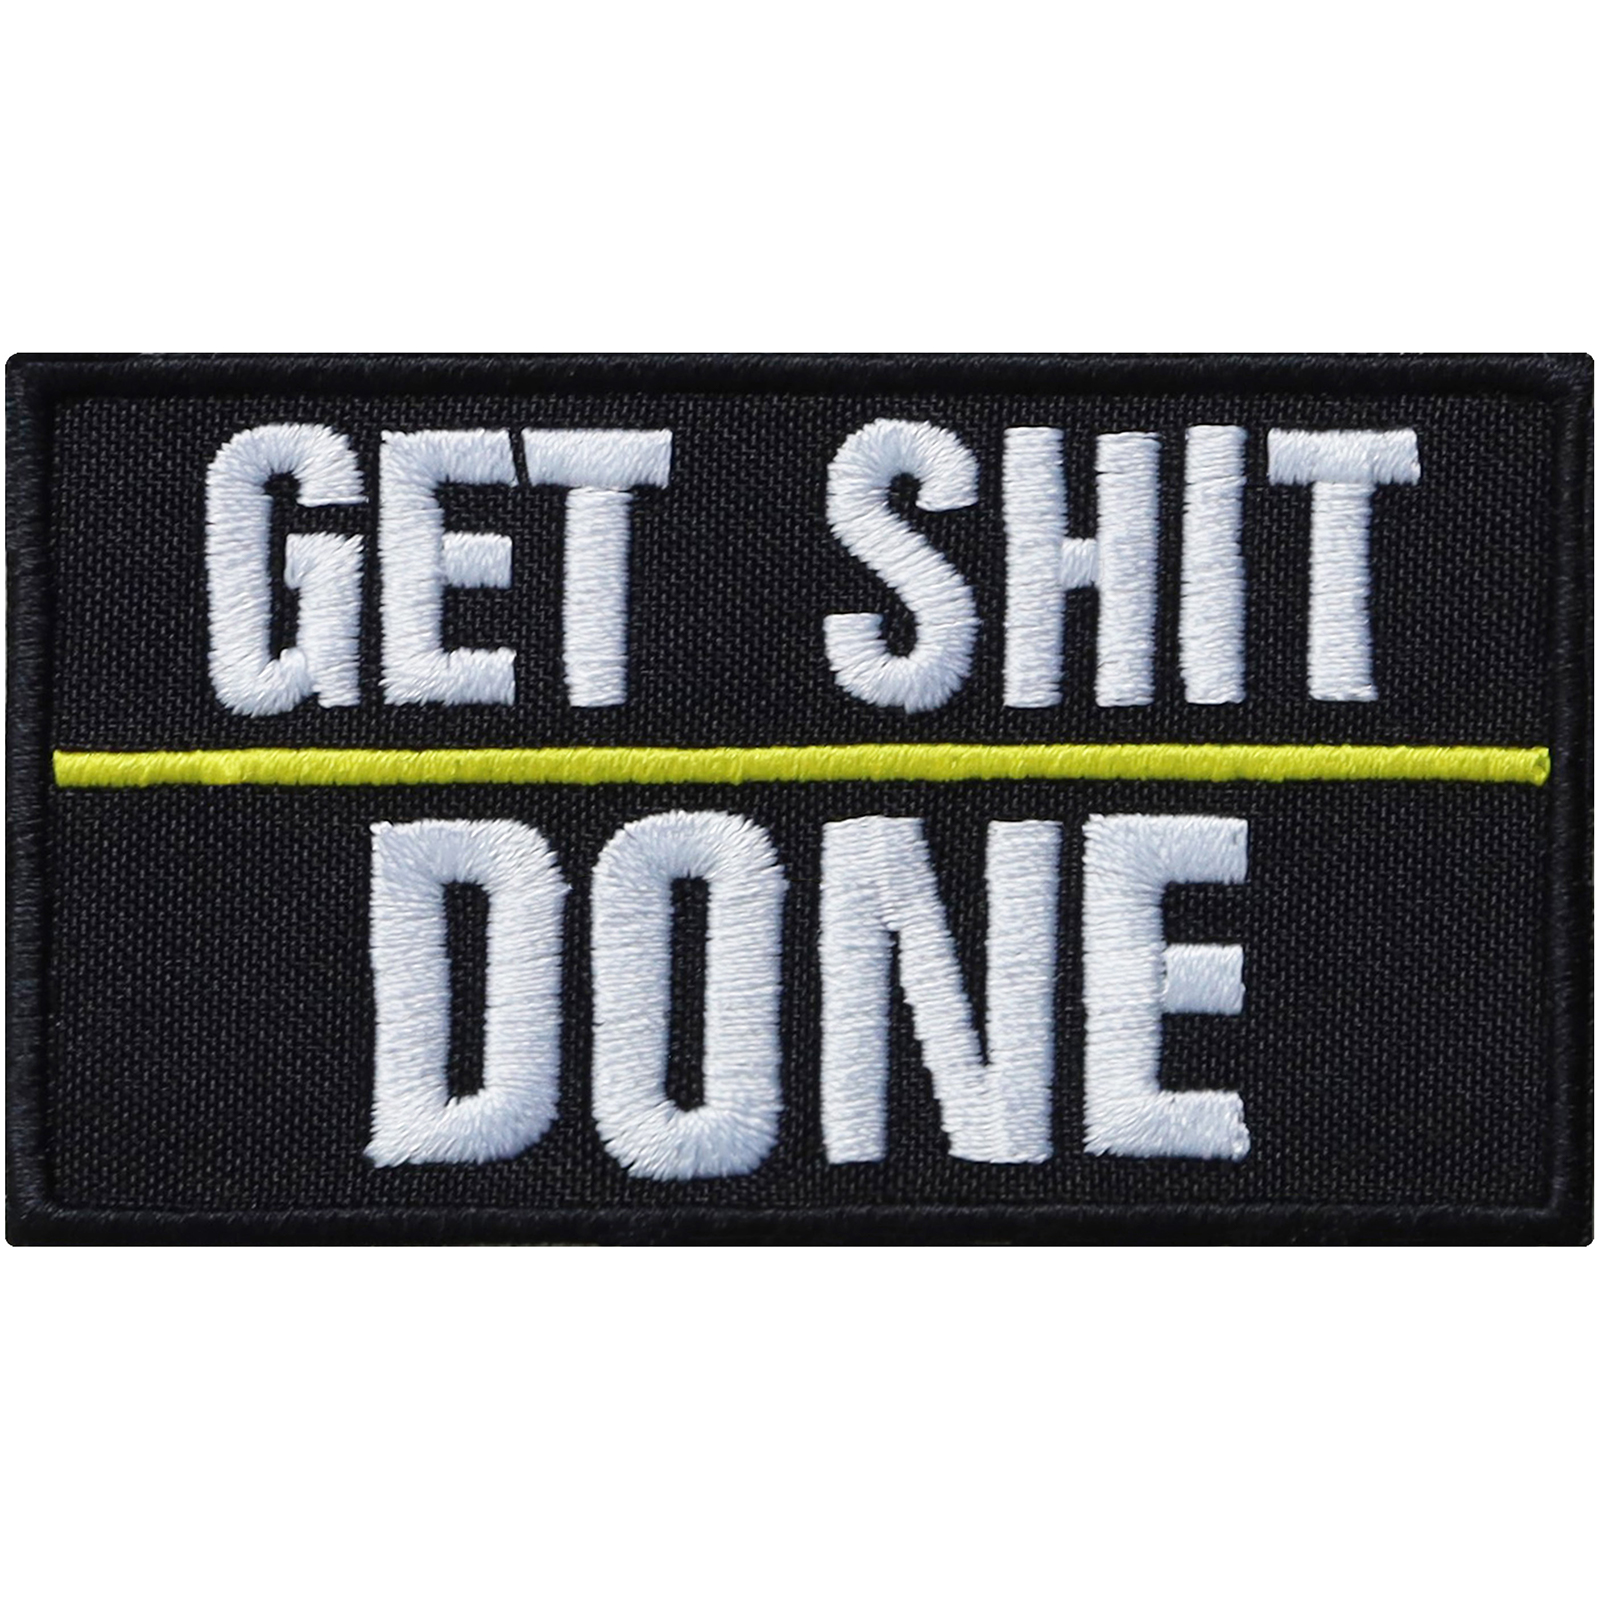 Get shit done - Patch